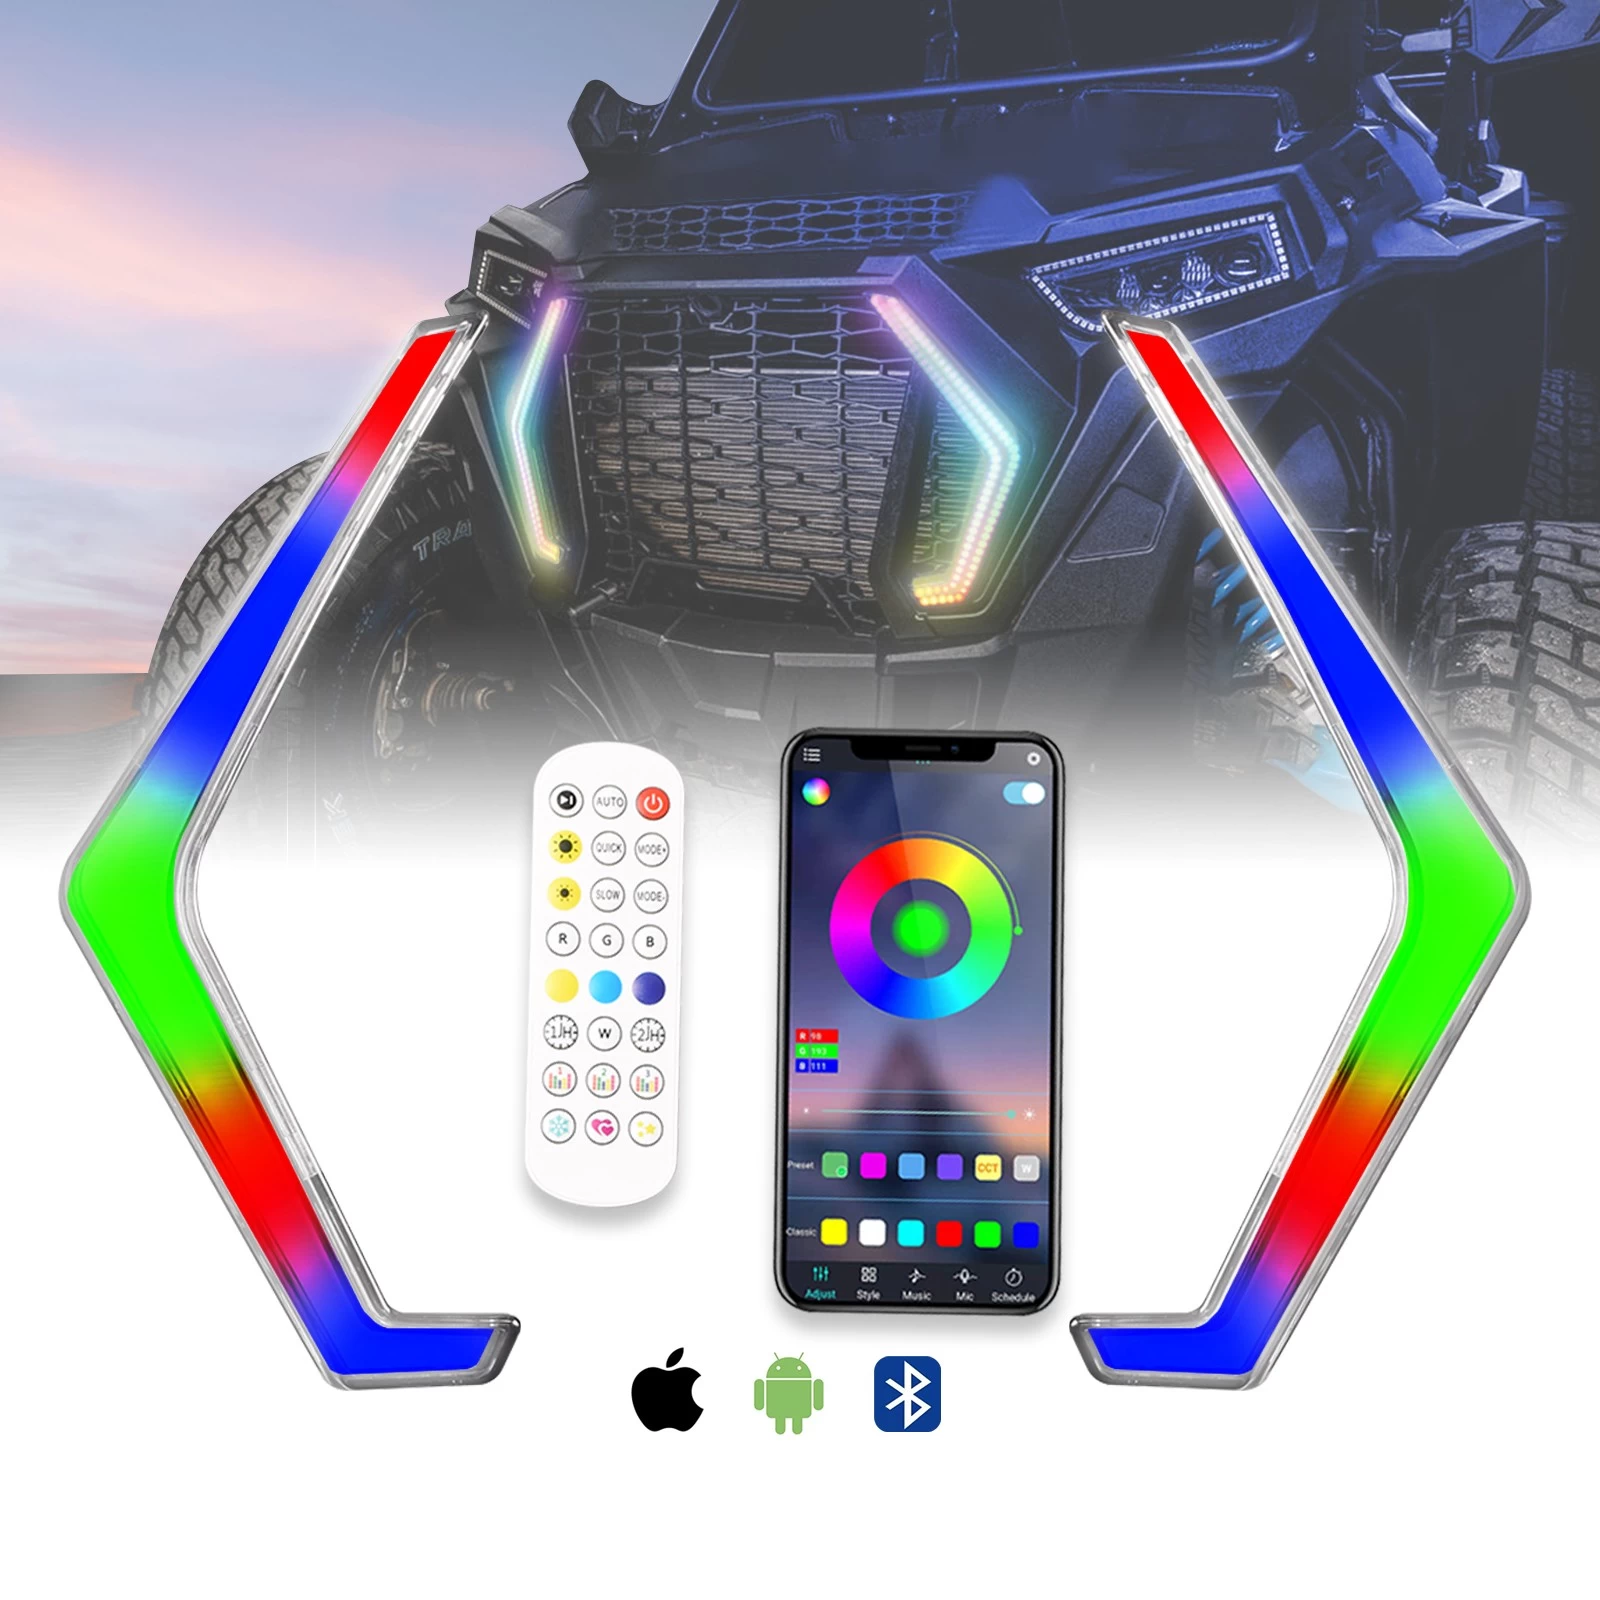 China Unionlux RZR Turn Signal Fang Lights , LED Turn Signal light with Chasing Color ,Remote Control, Front Signature Accent Fang Light Assembly for Polaris RZR XP 1000 Turbo 2019 2020 2021 manufacturer